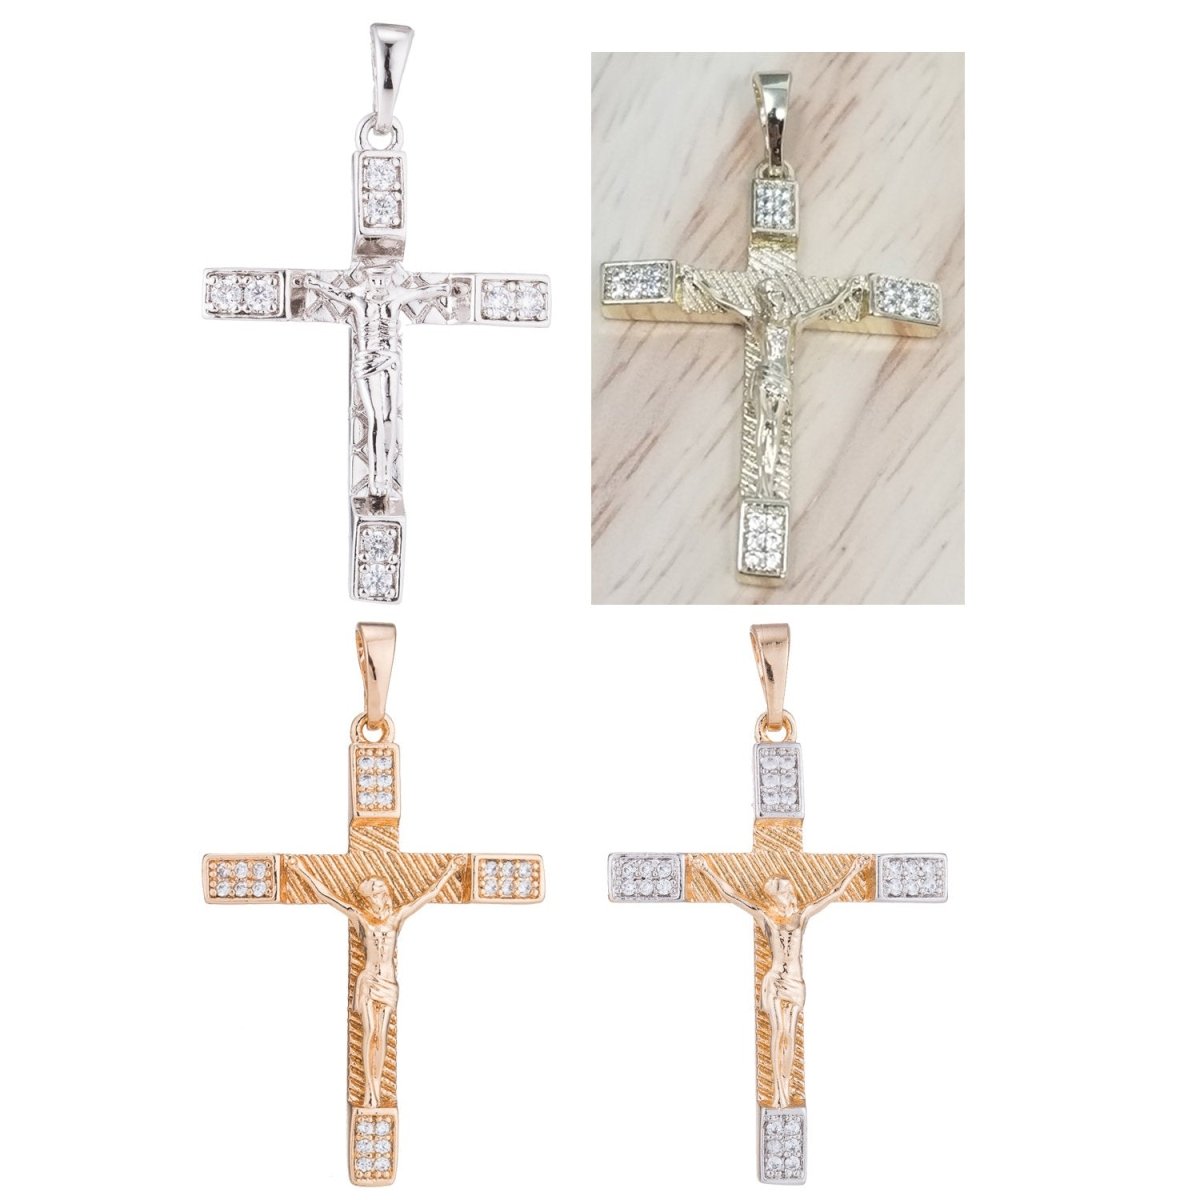 Gold Cross Cubic Zirconia Jesus Christ Crucifix Cross Pendant Charm for Jewelry Making Supplies Findings H-121 - DLUXCA